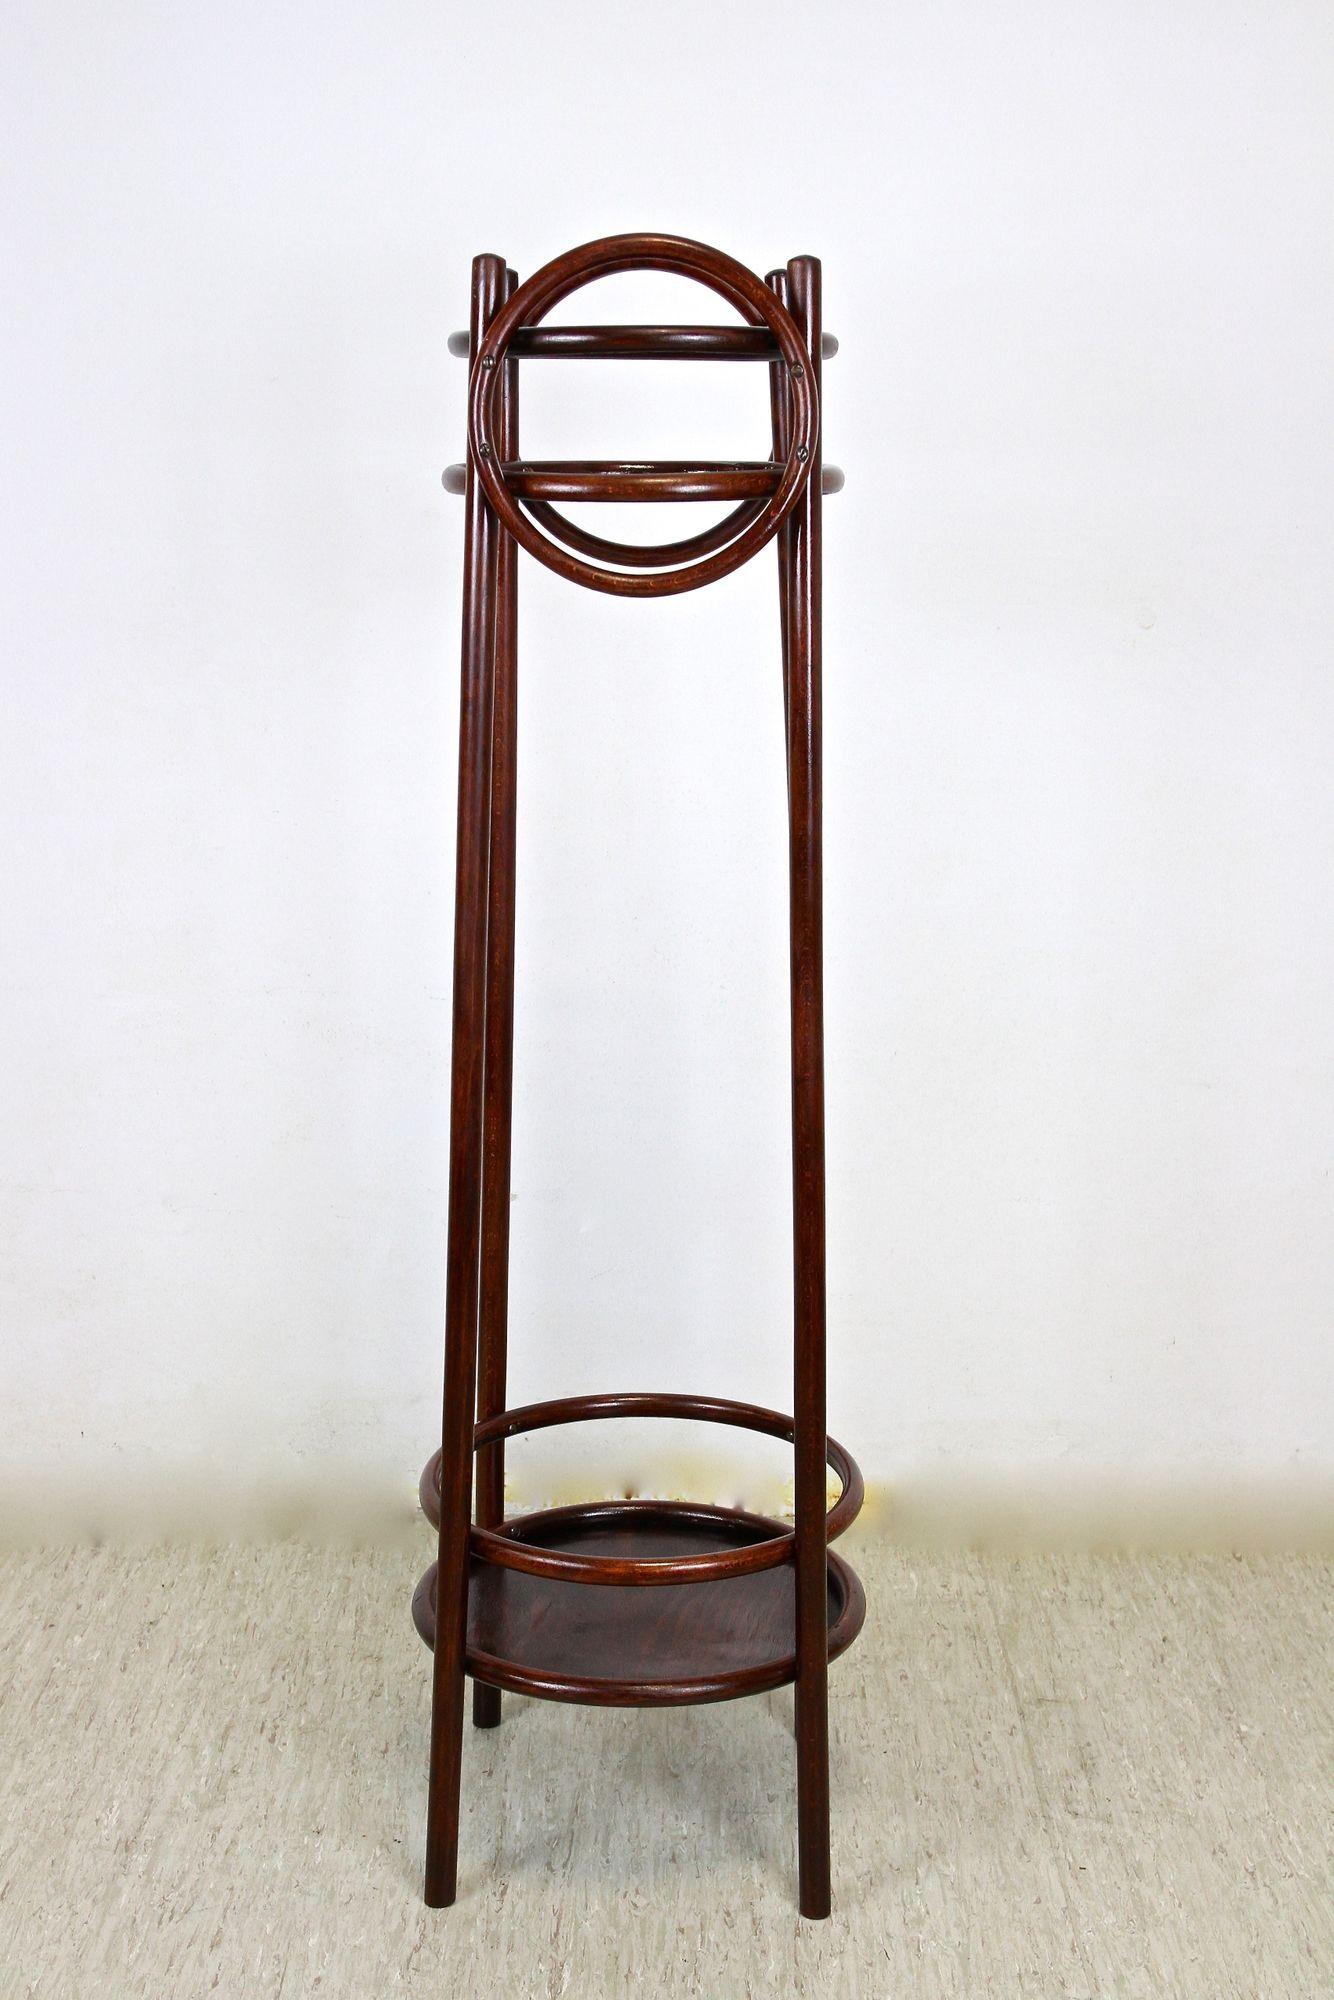 Polished Thonet Bentwood Pedestal/ Plant Stand, Austria circa 1905 For Sale